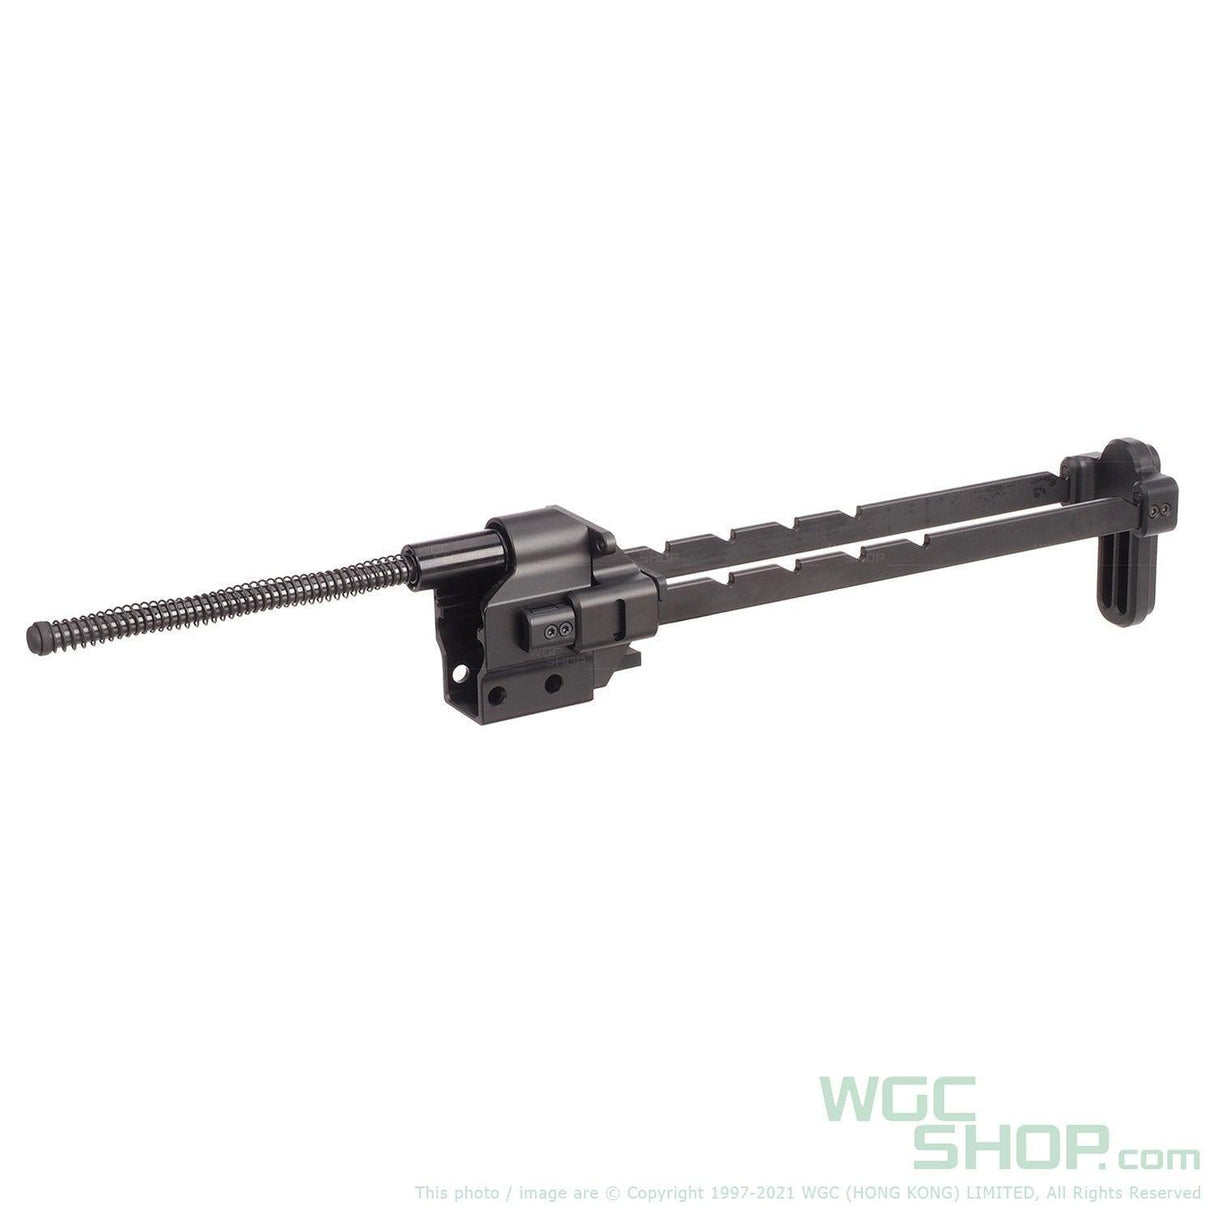 BOW MASTER x GMF 5 Position Buttstock for VFC G3 GBB Airsoft Series - WGC Shop